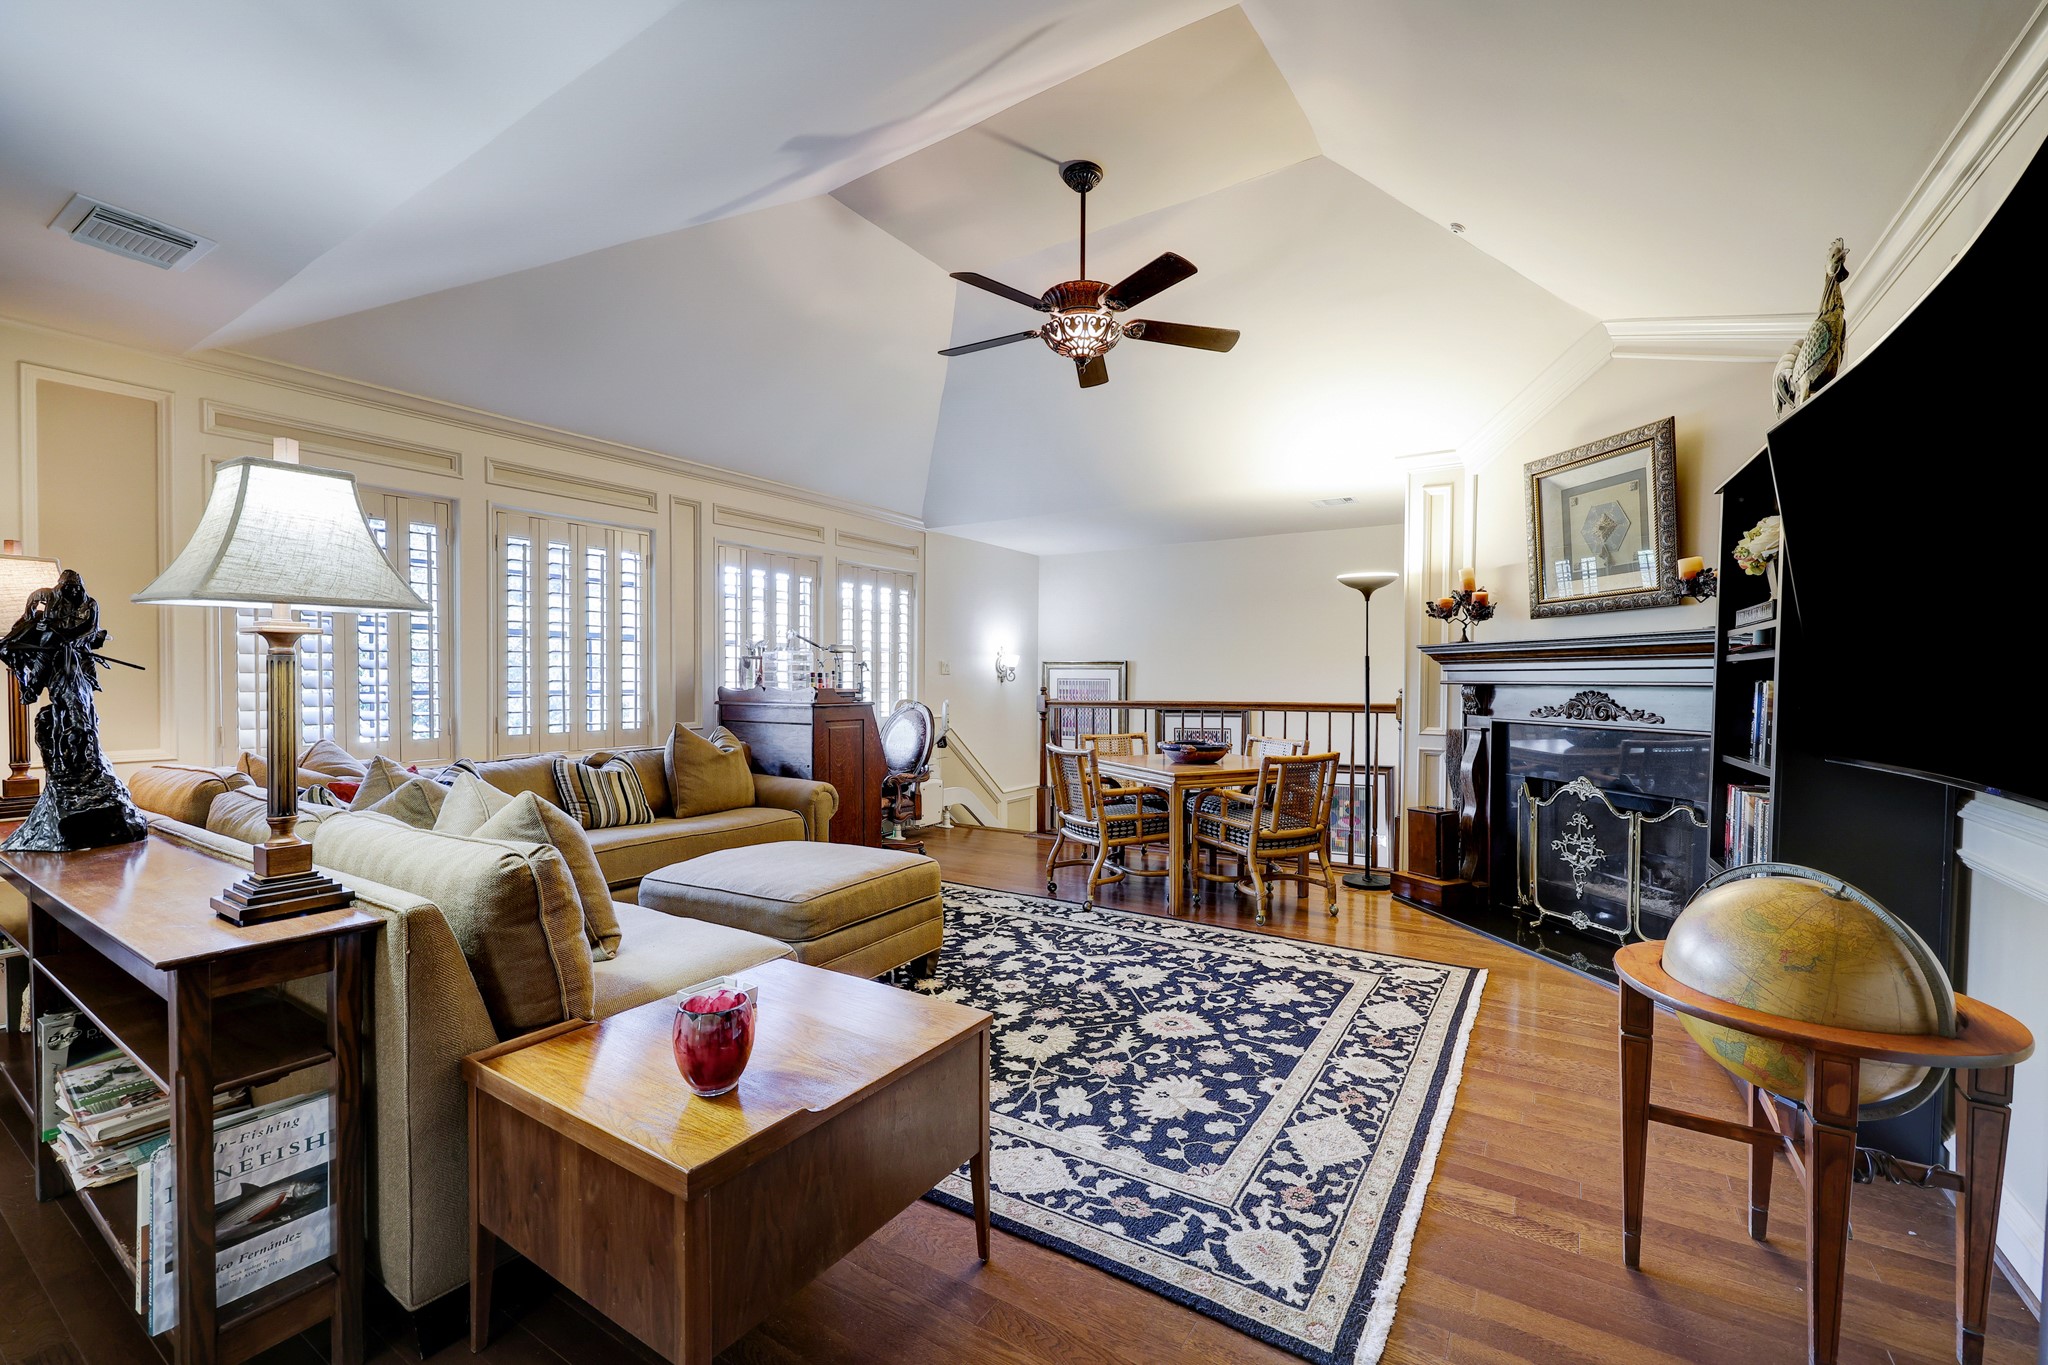 The spacious great room on the second floor features plantation shutters that offer both privacy and a timeless aesthetic. A custom mantel makes this area an ideal retreat for relaxation or entertainment. The vaulted ceilings amplify the sense of space, creating an open, airy atmosphere.